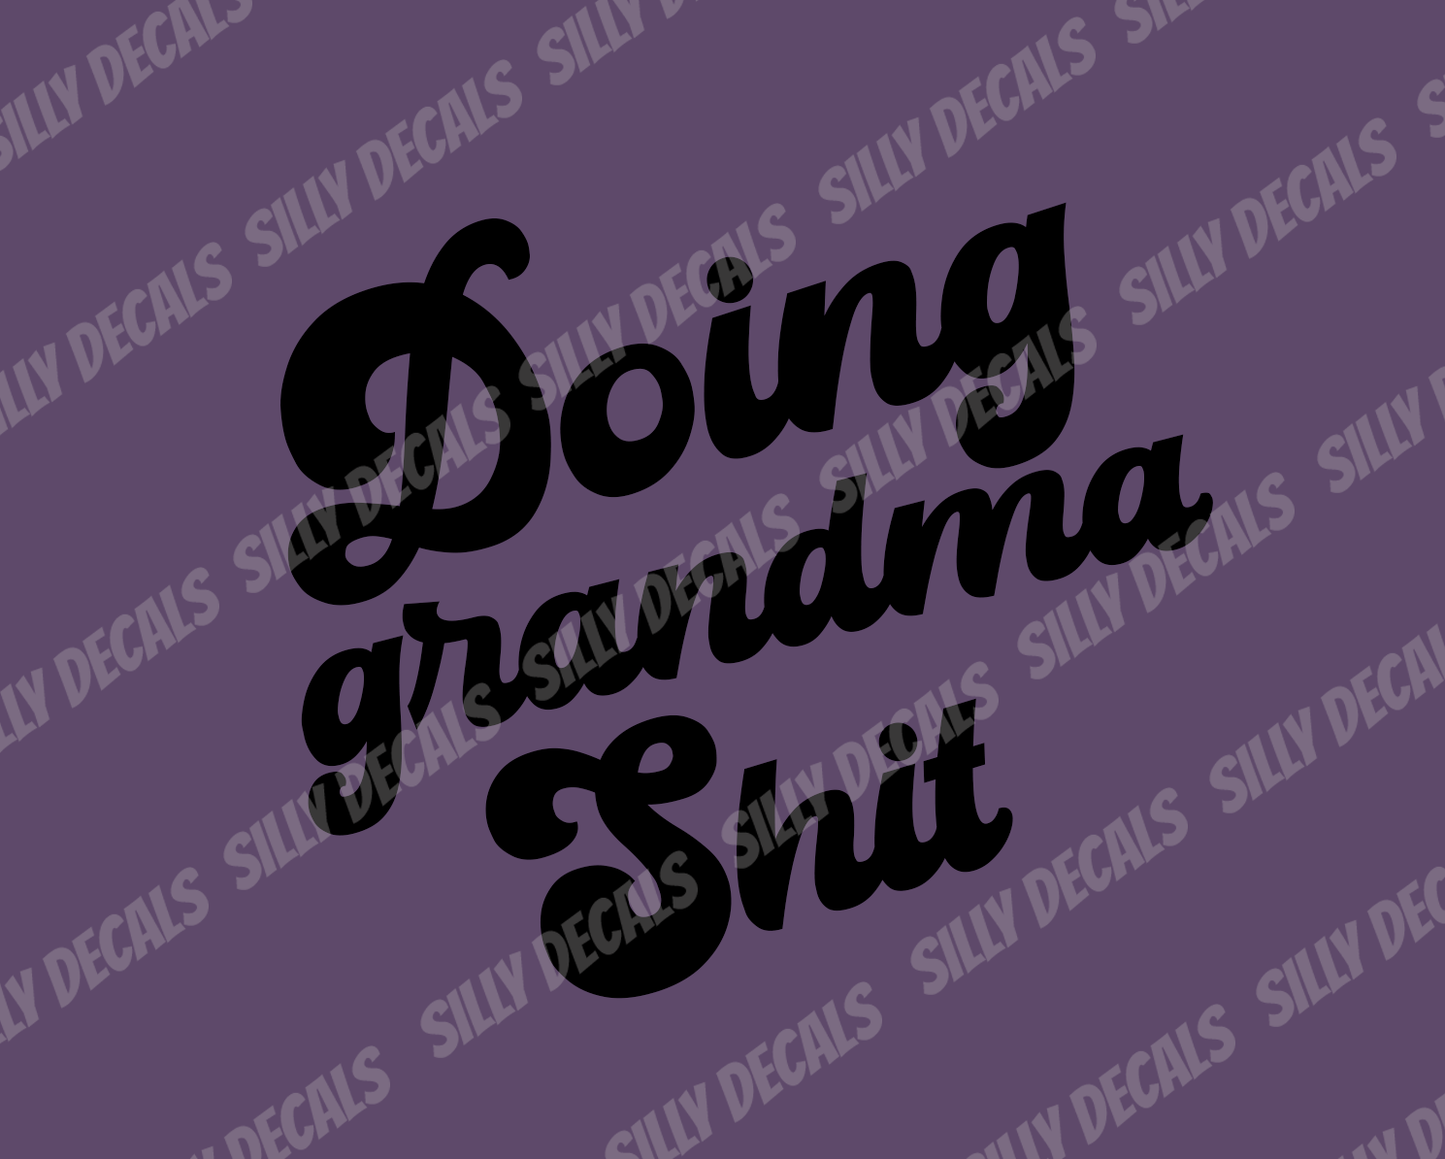 Doing Grandma Shit; Funny Vinyl Decals Suitable For Cars, Windows, Walls, and More!